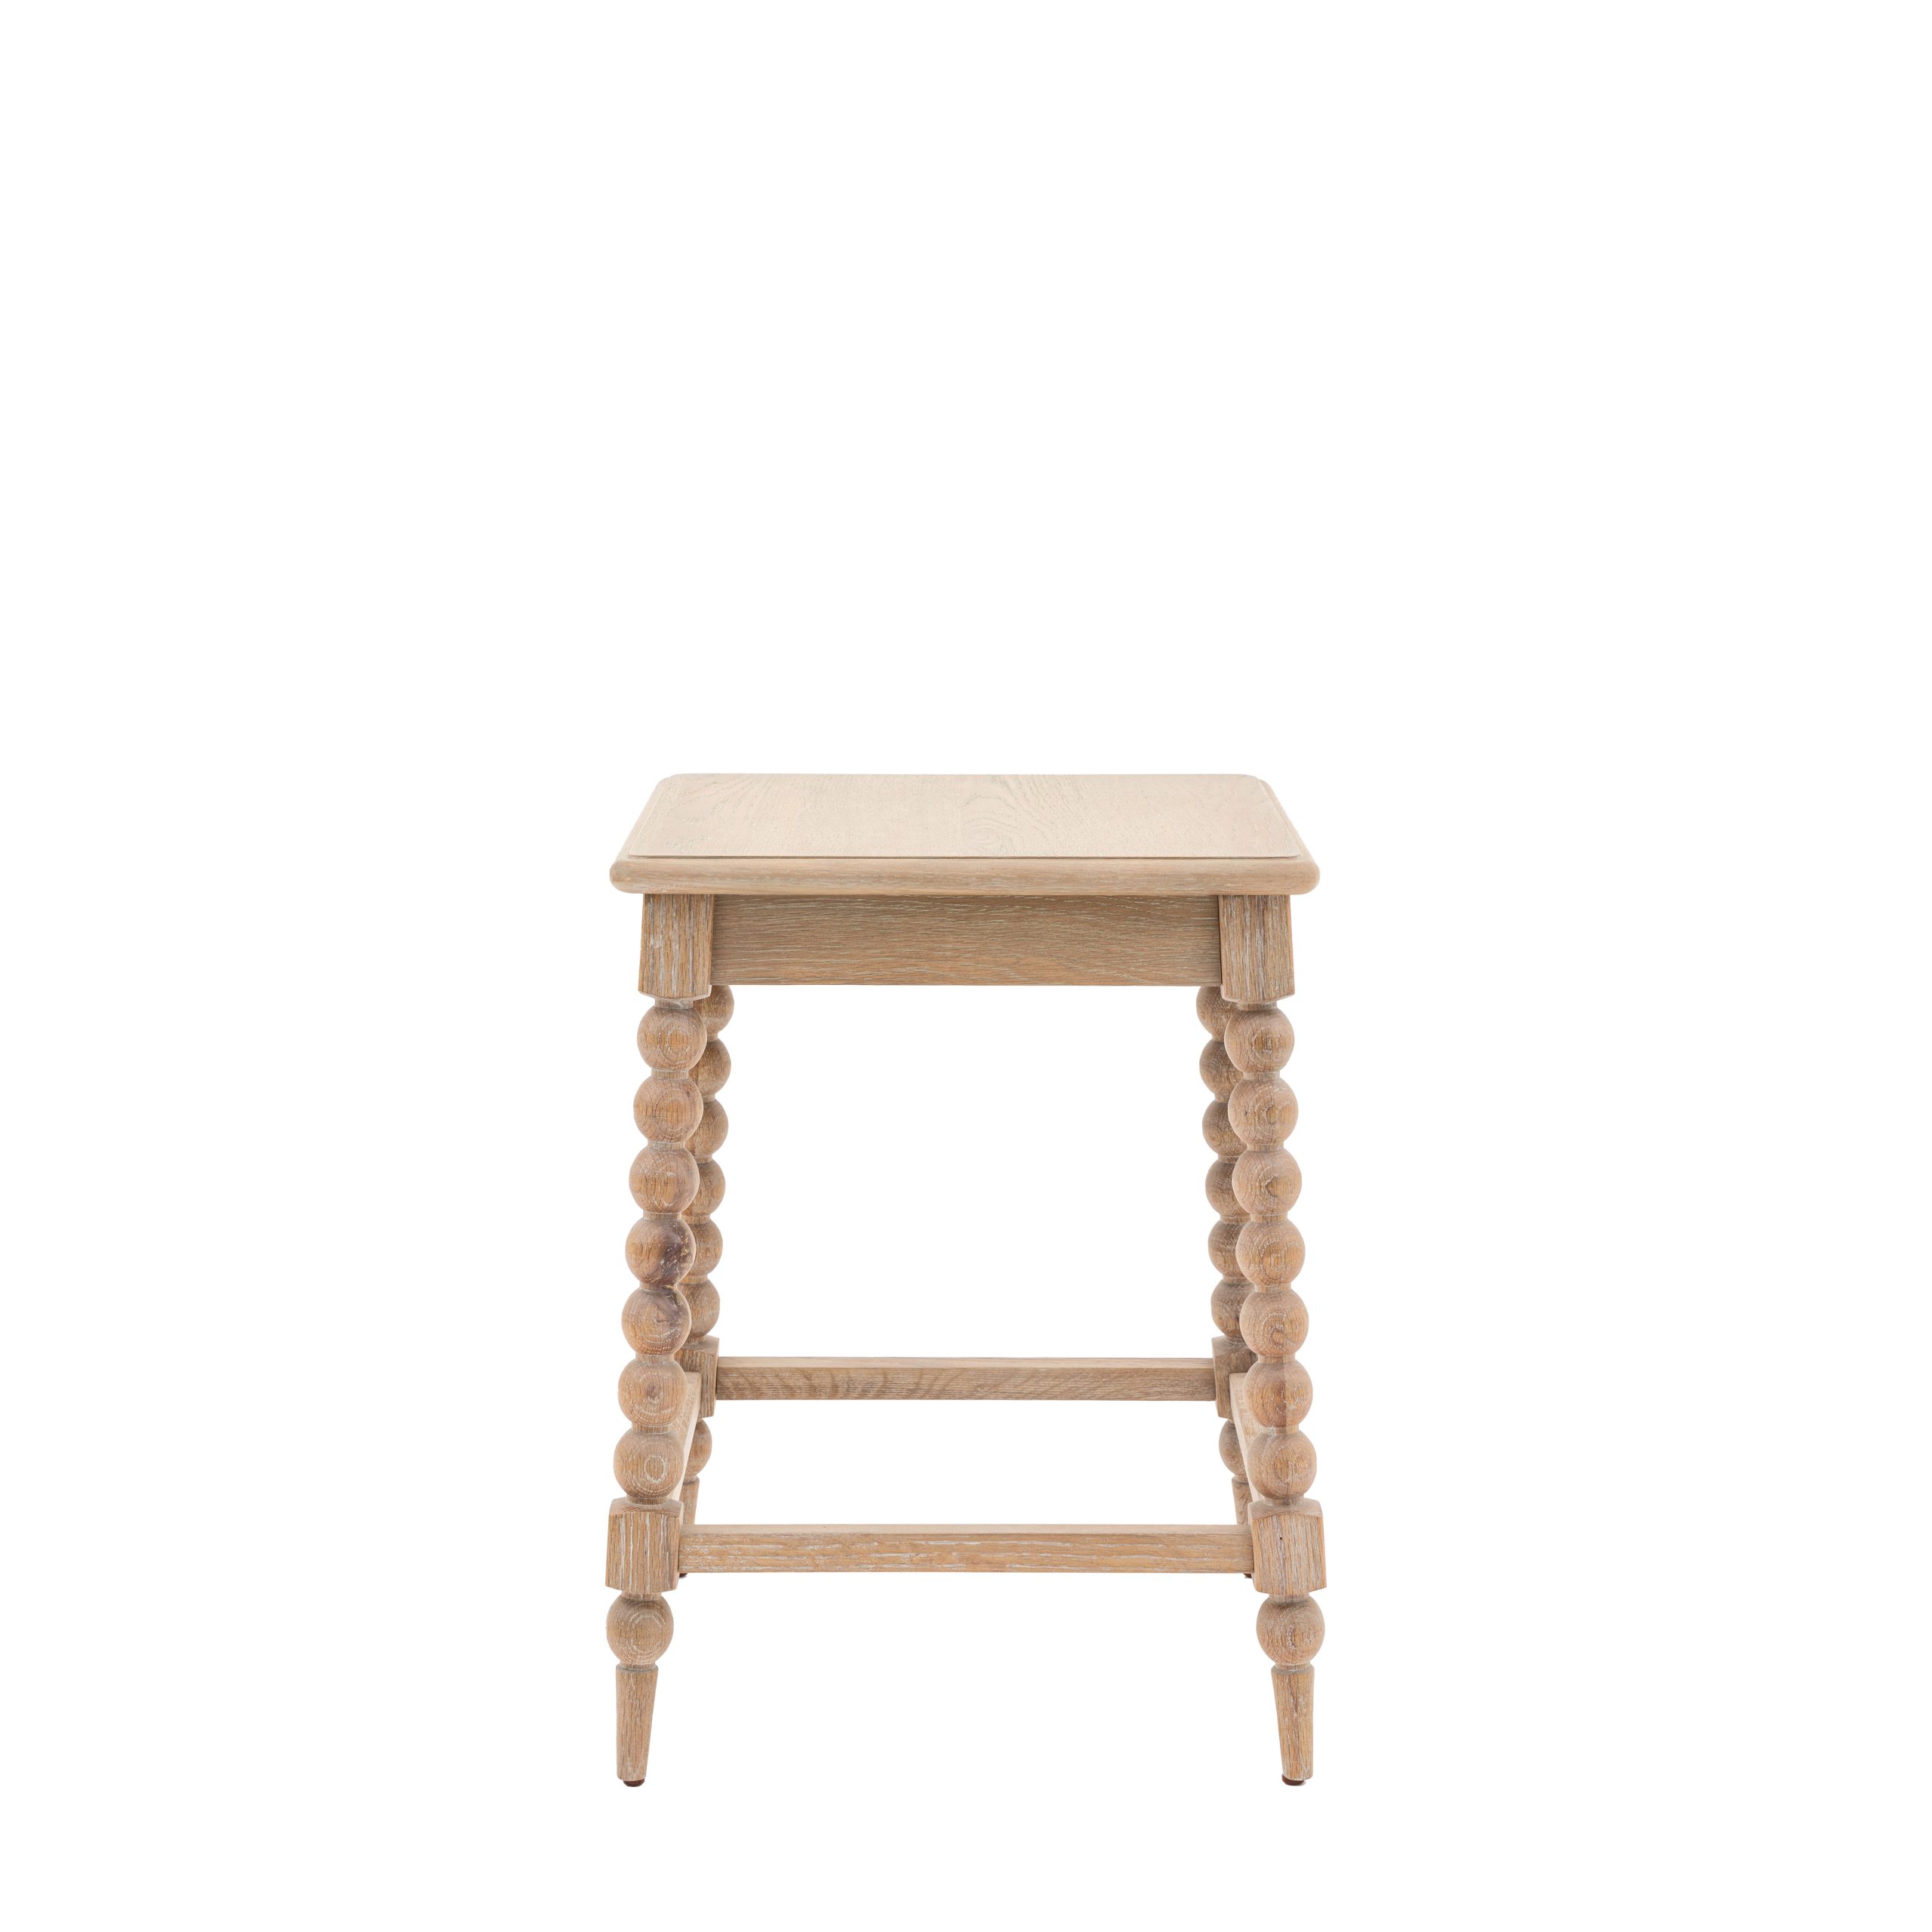 Gallery Direct Artisan Side Table